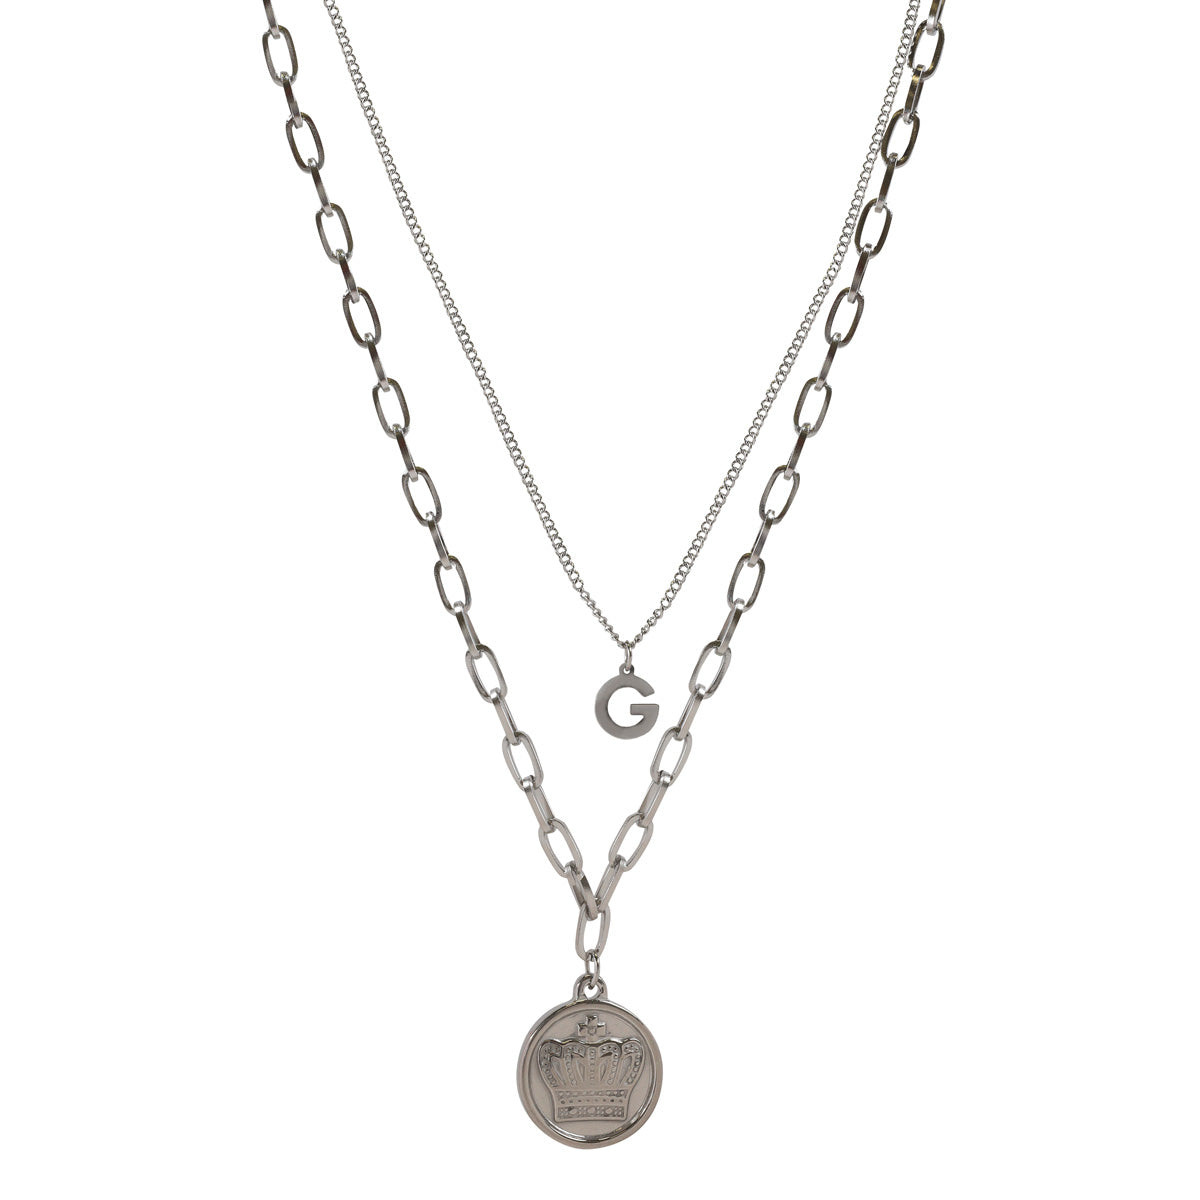 Two-row necklace with cable chain pendant (steel)